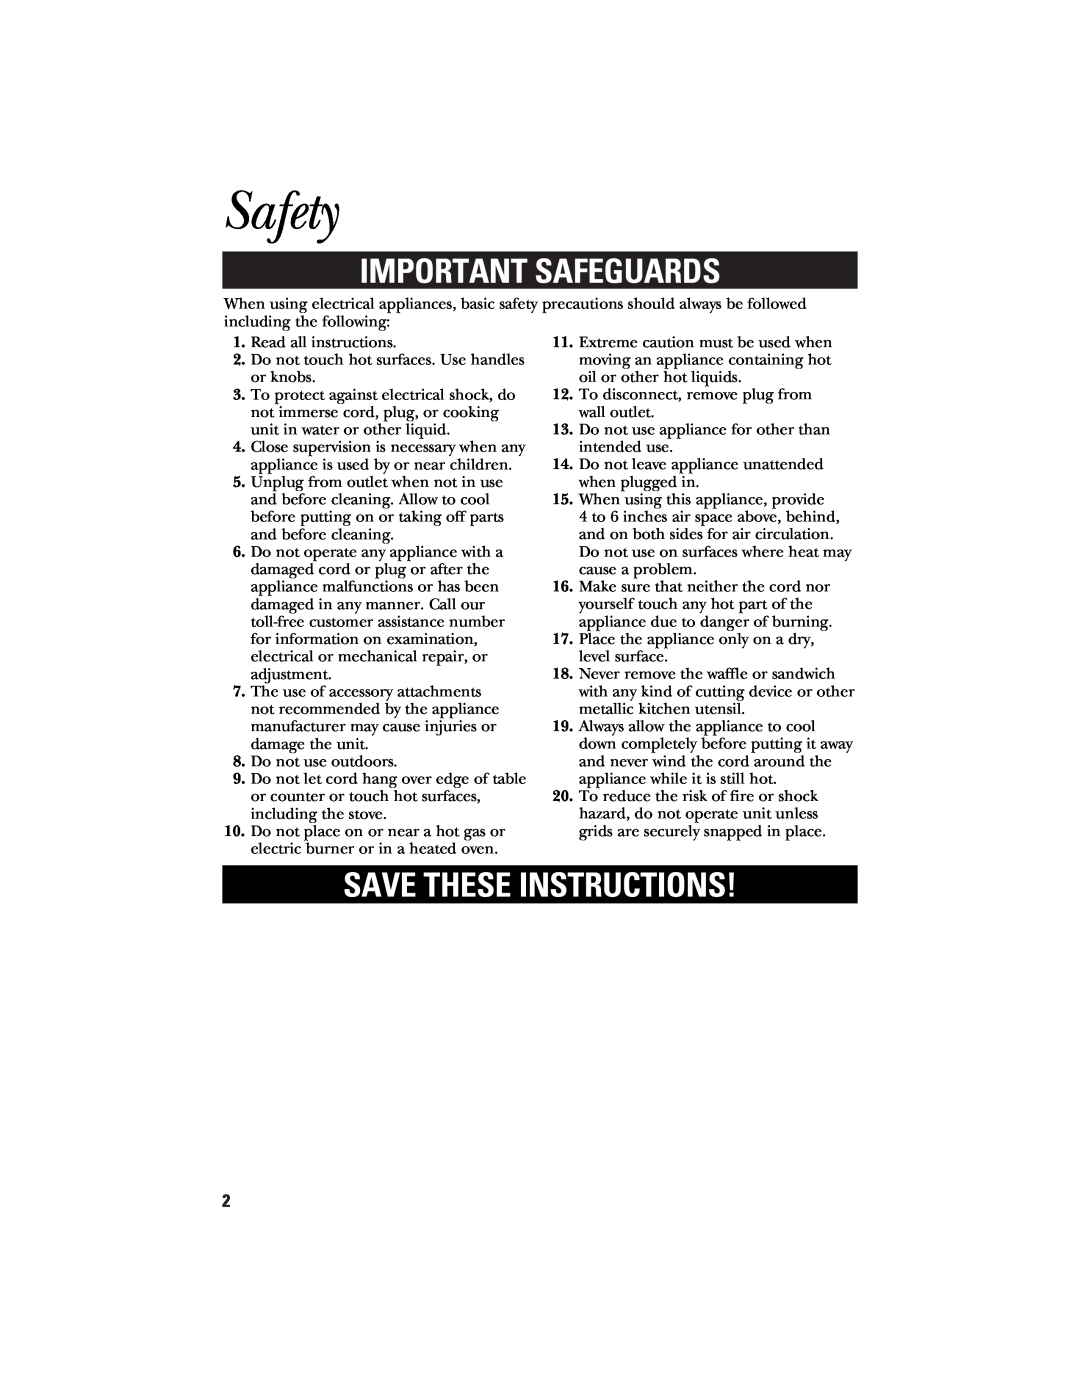 GE 106748 manual Safety, Important Safeguards, Save These Instructions 